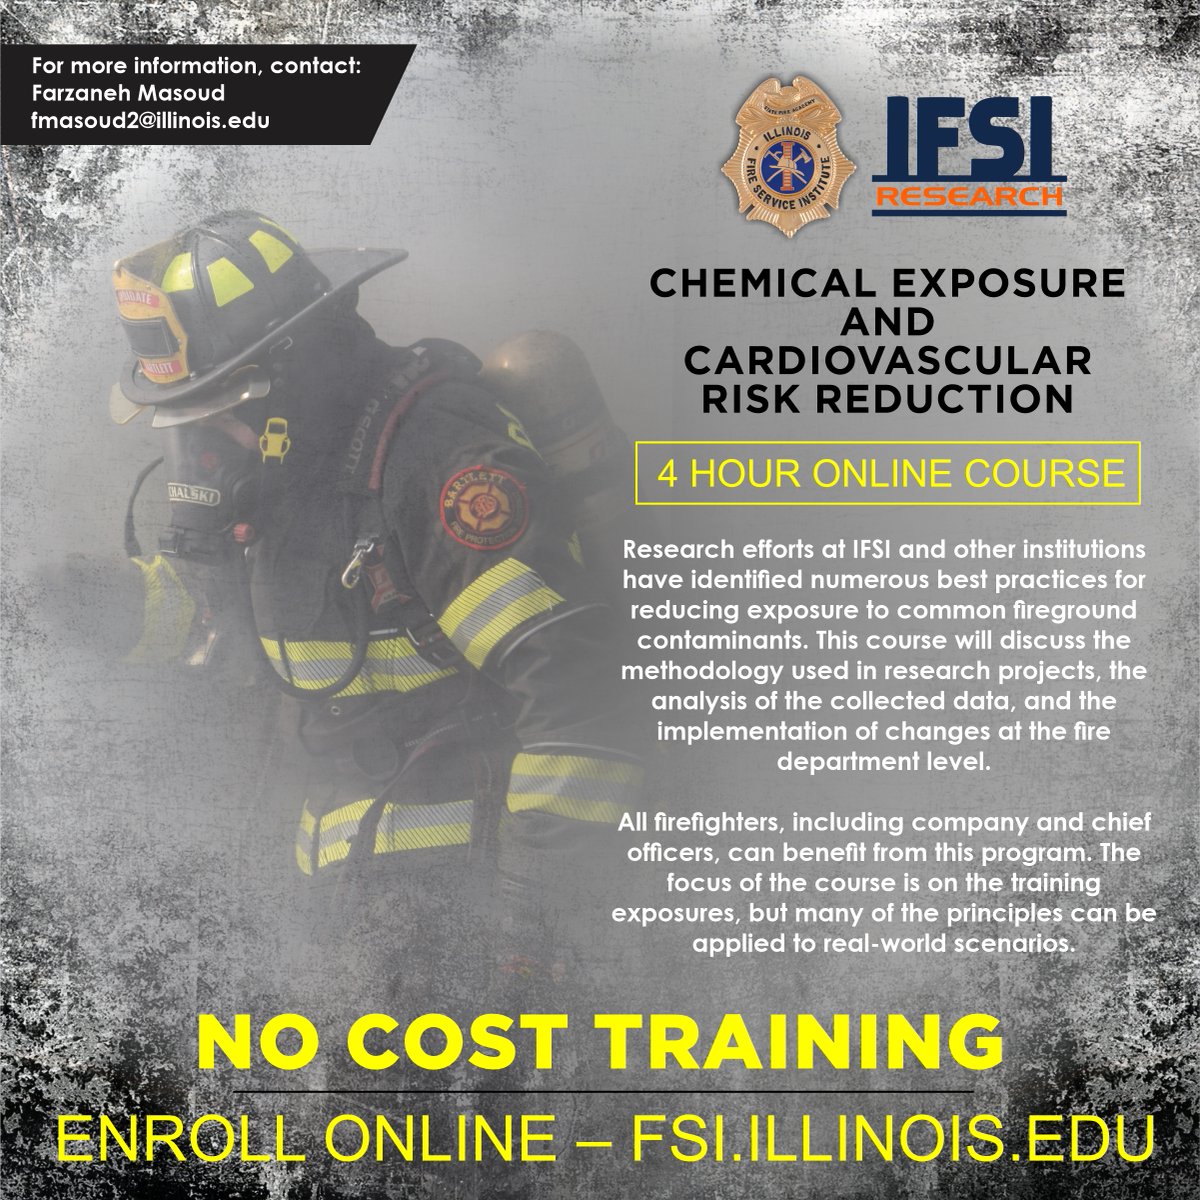 A reminder that this on demand course is available at no cost to all students. #weareifsi #100yearsIFSI